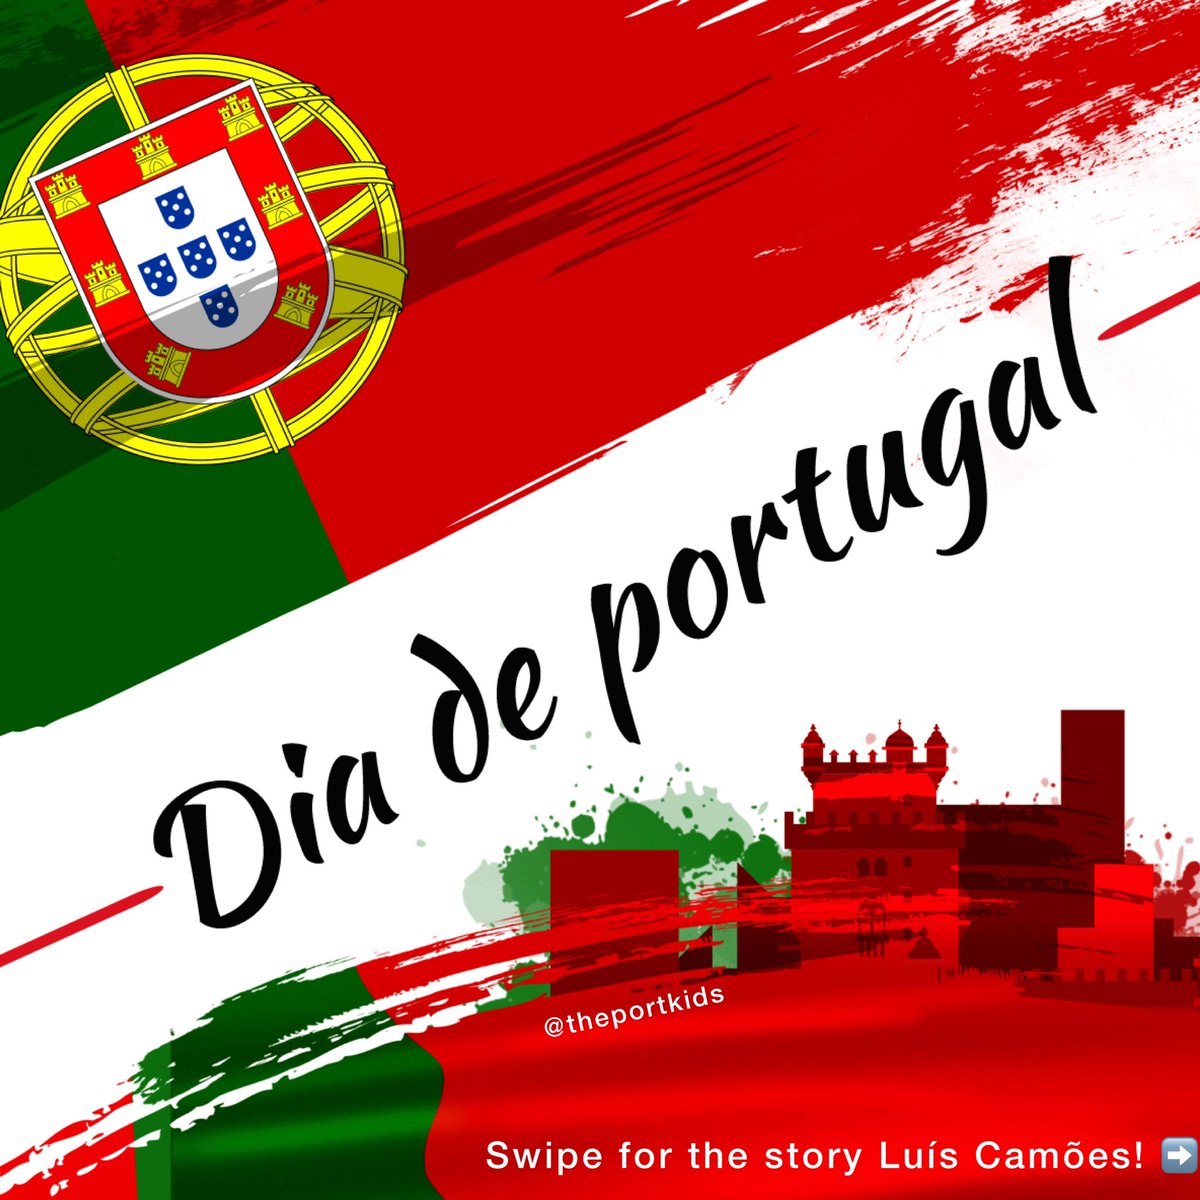 Happy Day of Portugal to all of the communities around the world! #Portugal #DayofPortugal #DiaDePortugal #luíscamões